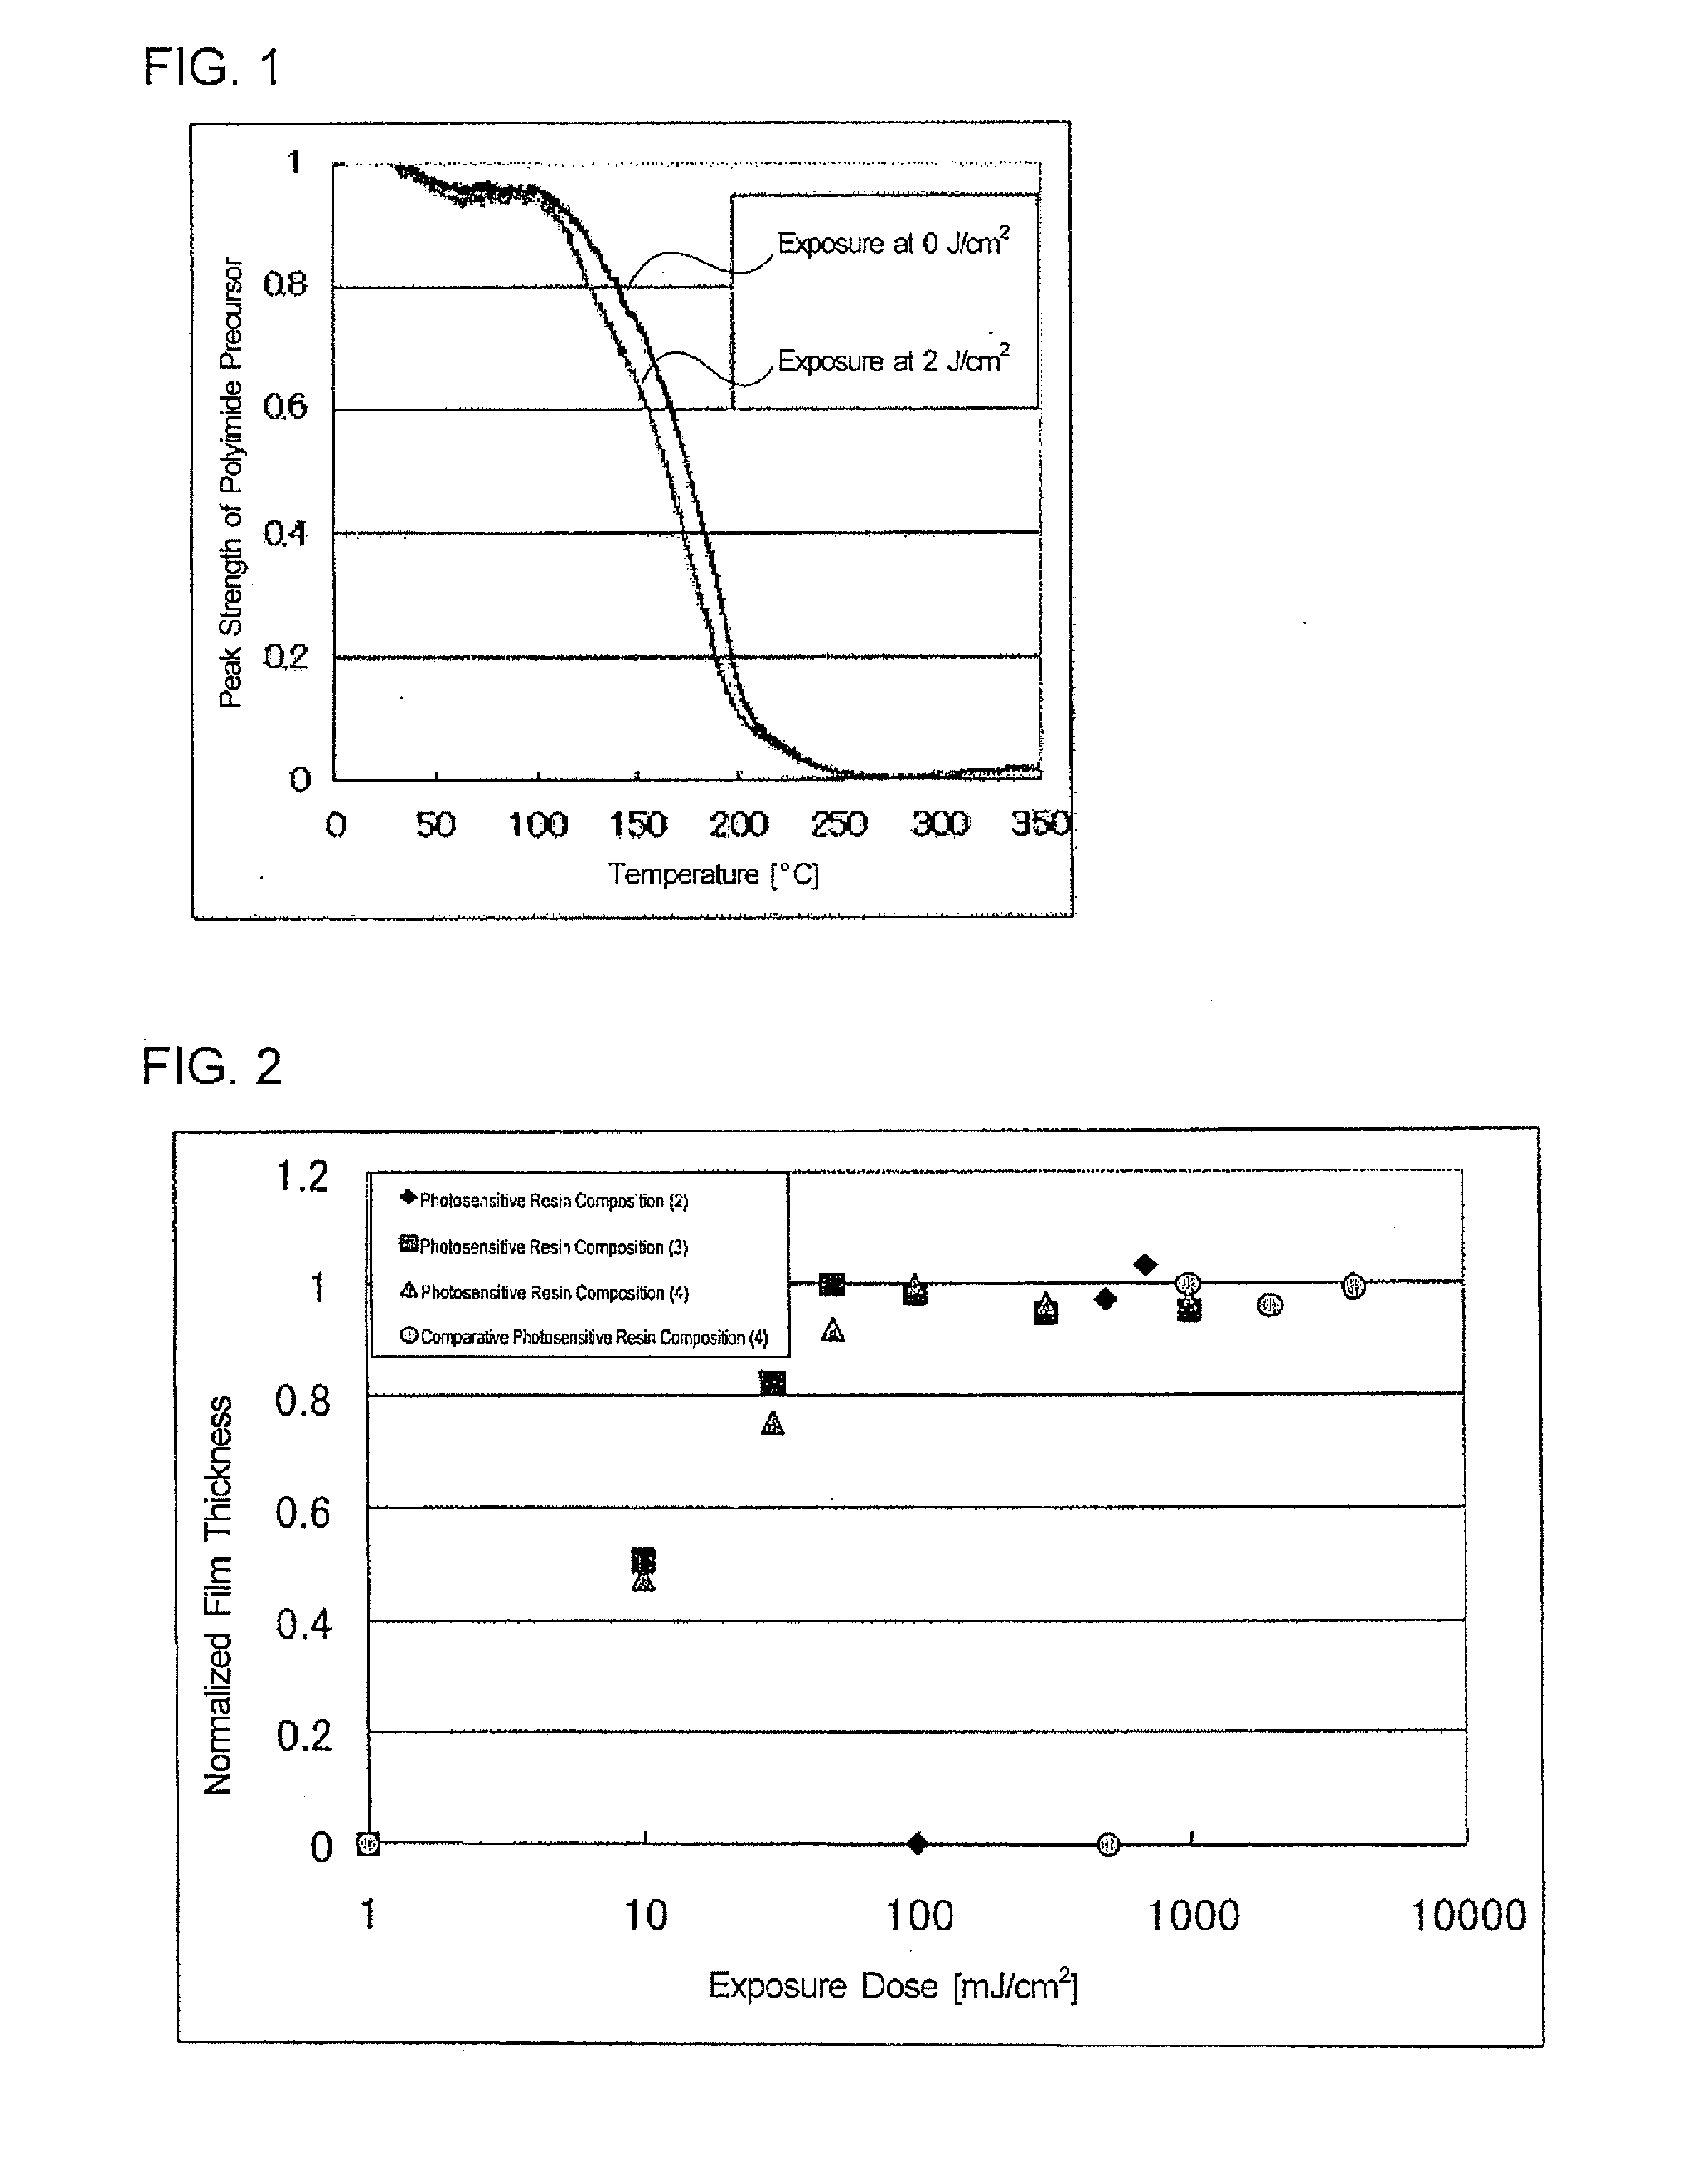 Base generator, photosensitive resin composition, pattern forming material comprising the photosensitive resin composition, and pattern forming method and article using the photosensitive resin composition